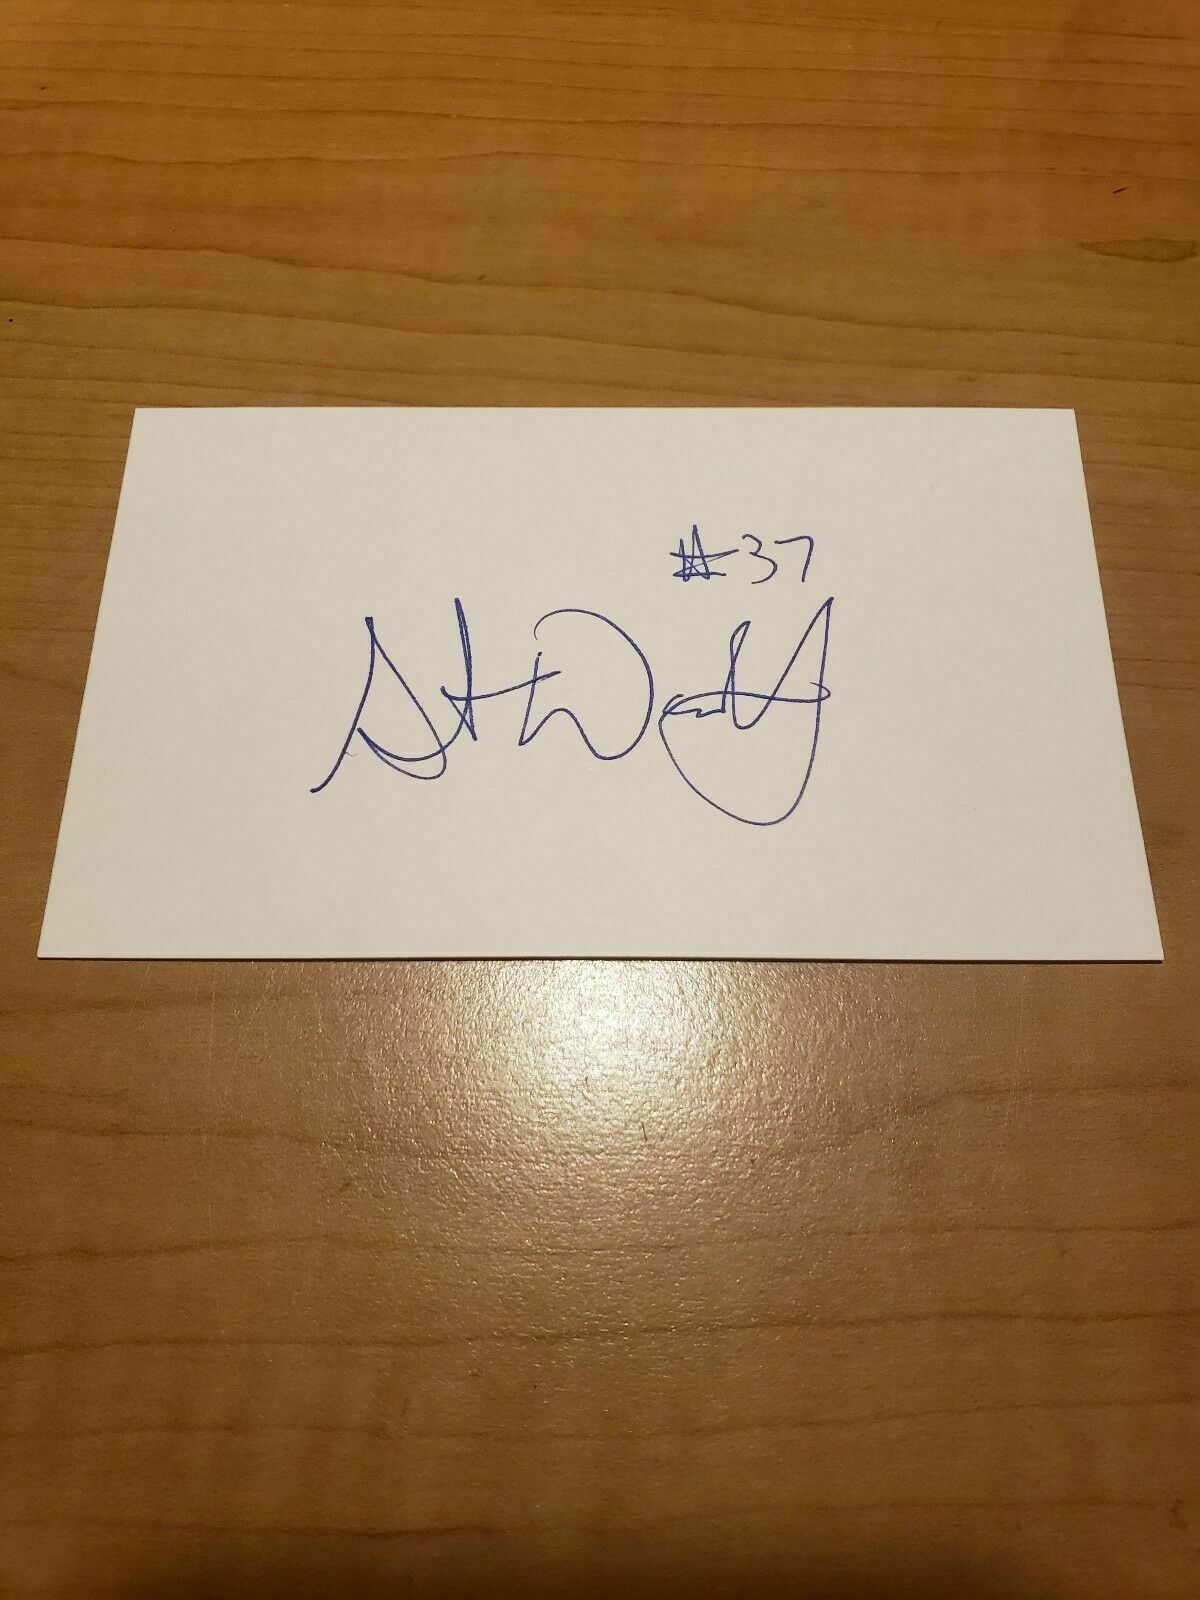 STEVE WEATHERFORD - FOOTBALL - AUTOGRAPH SIGNED - INDEX CARD -AUTHENTIC - A5754